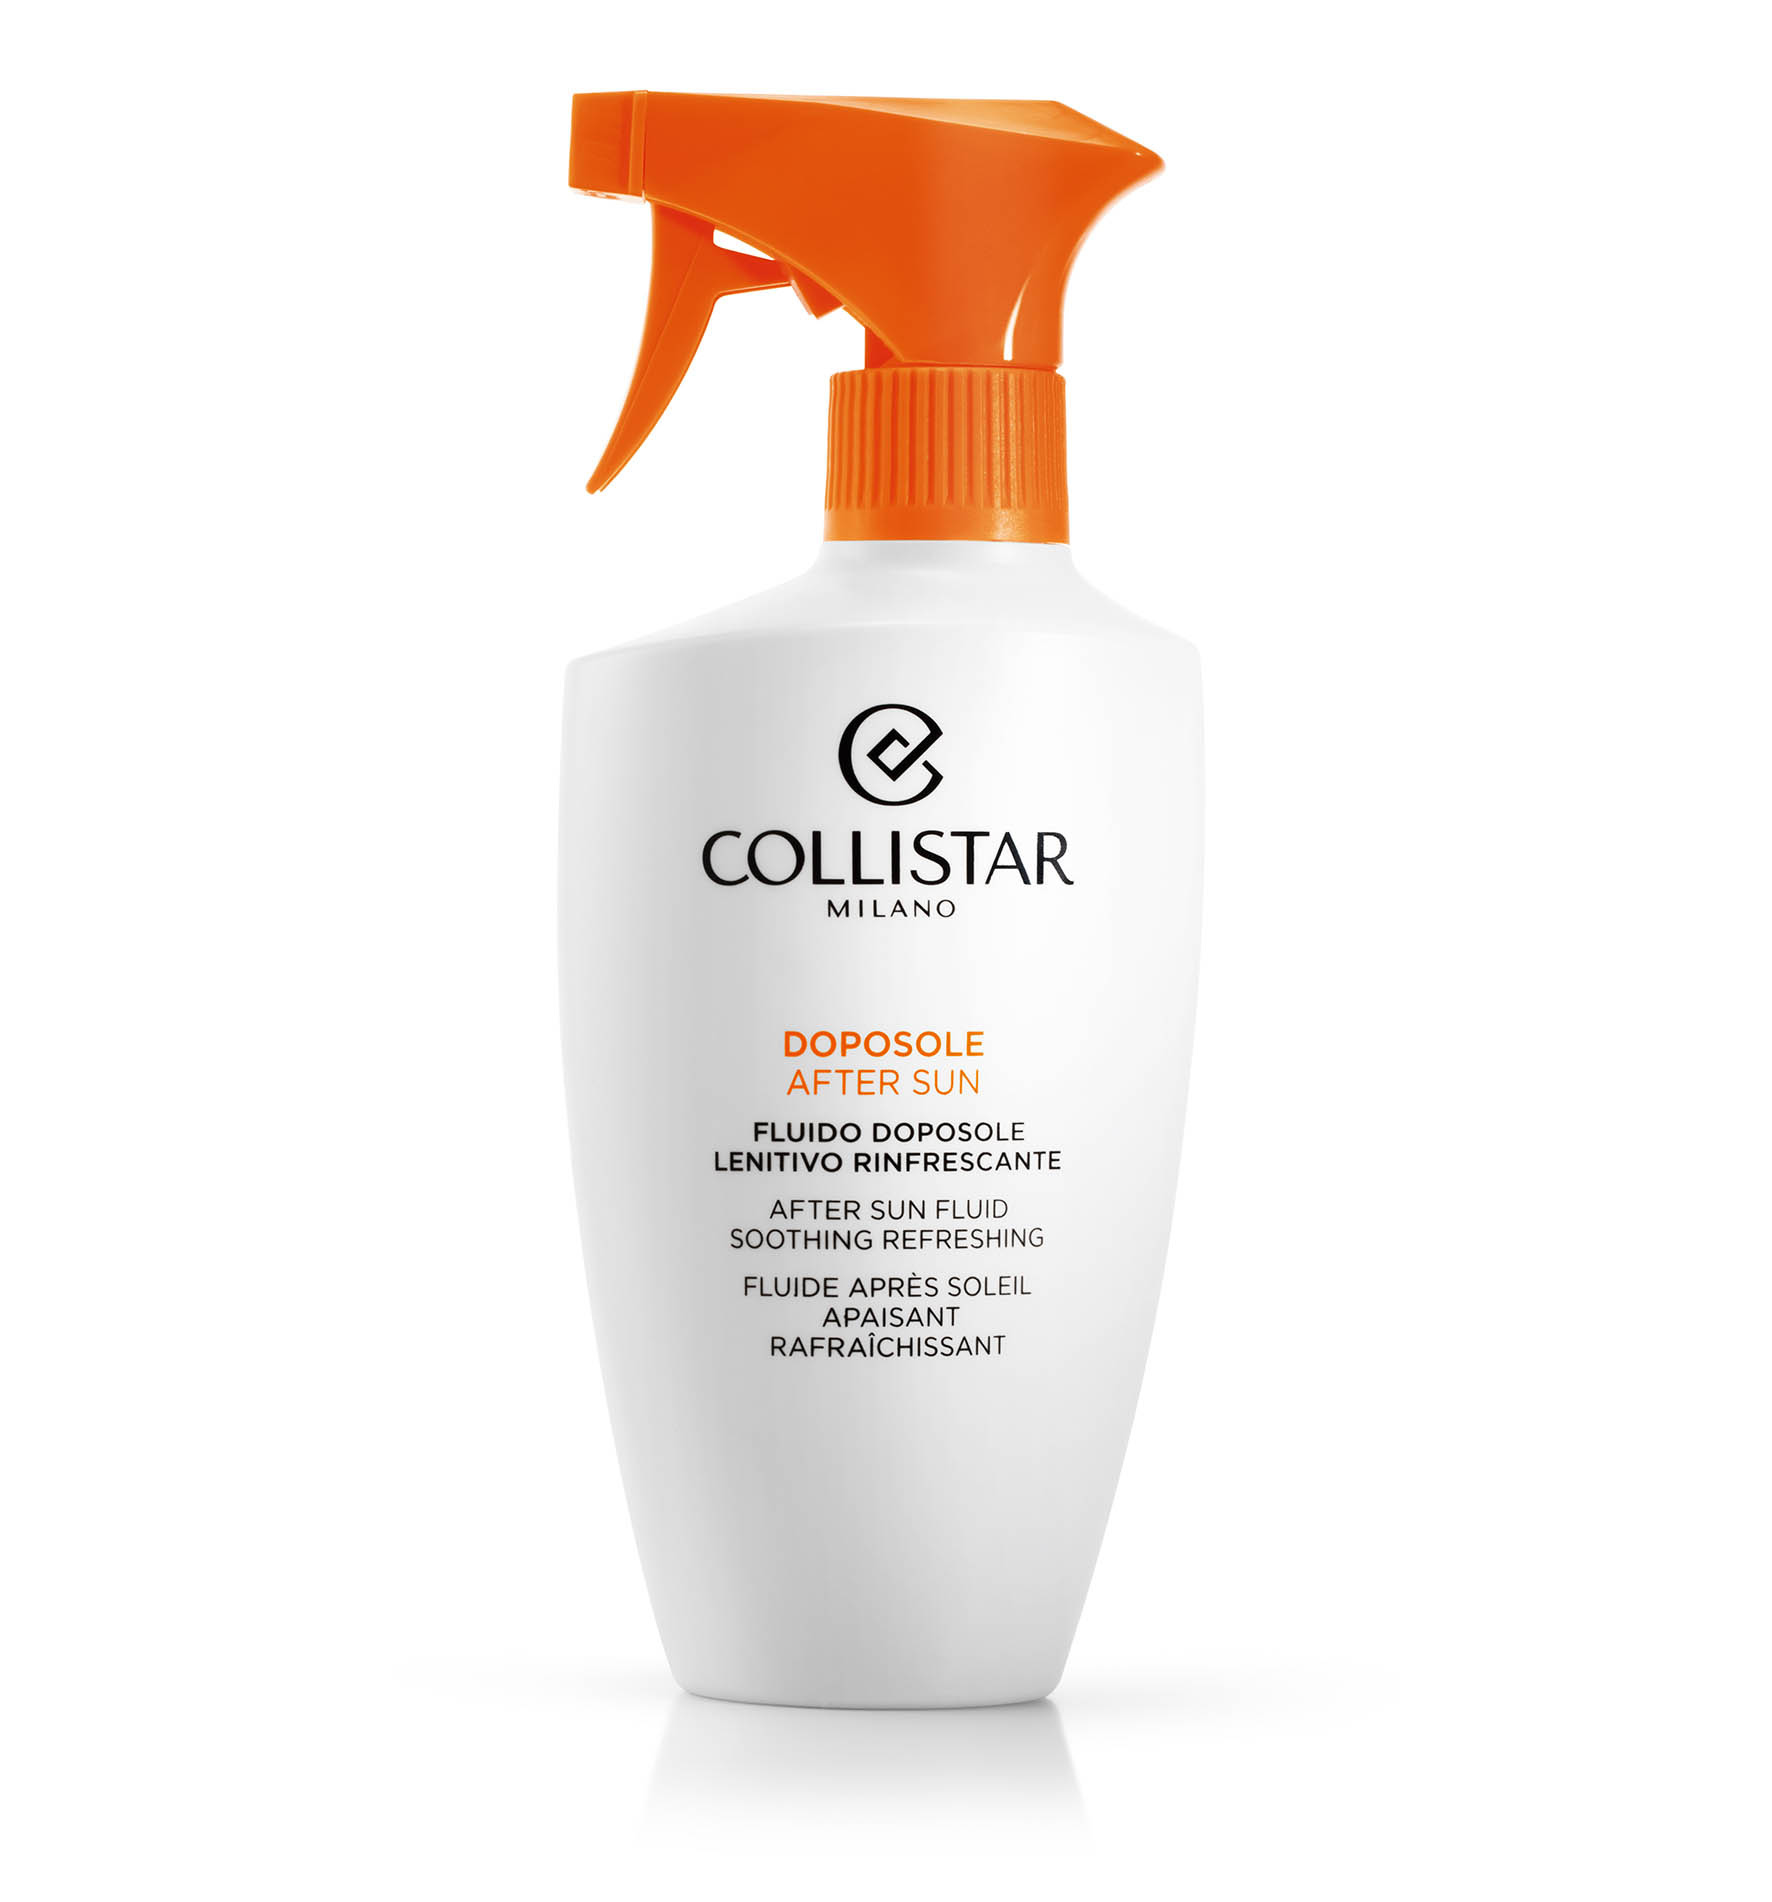 AFTER SUN FLUID SOOTHING REFRESHING | Collistar - Shop Online Ufficiale